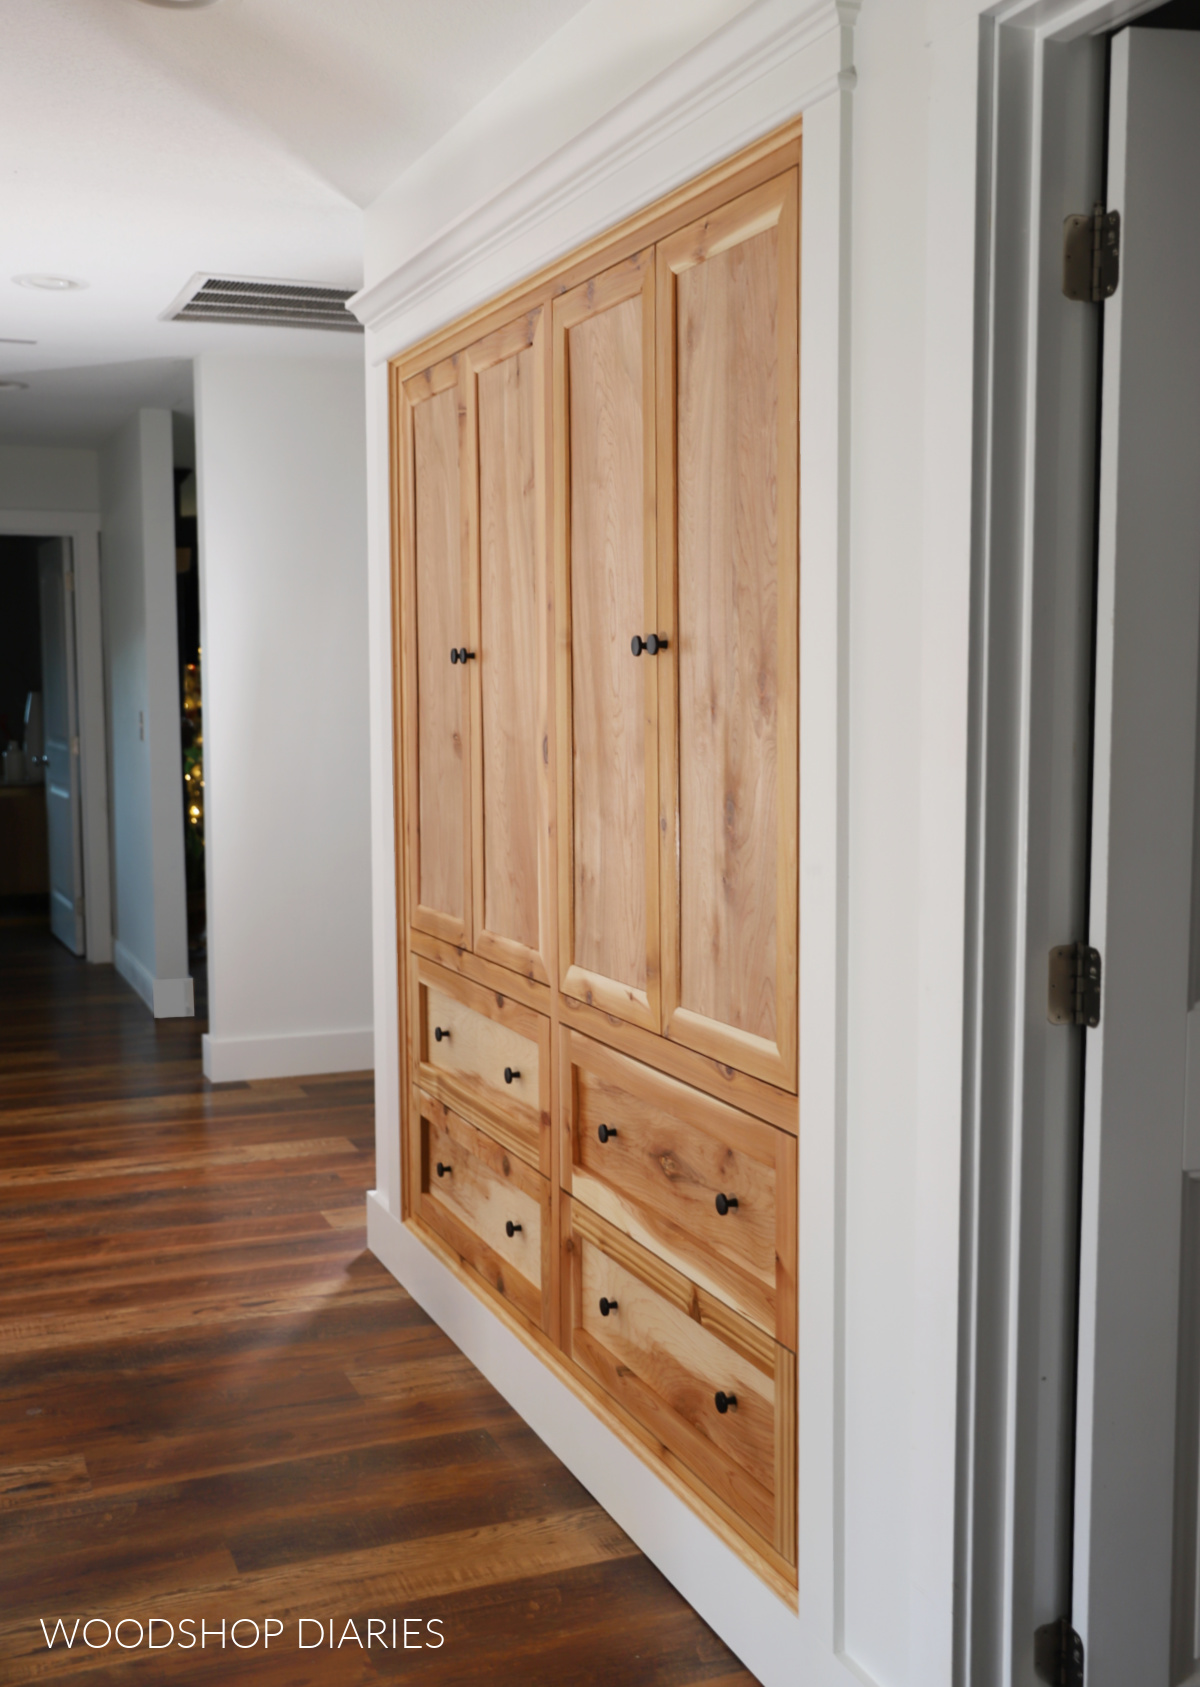 Warm wood custom built in cabinets in hallway with white walls